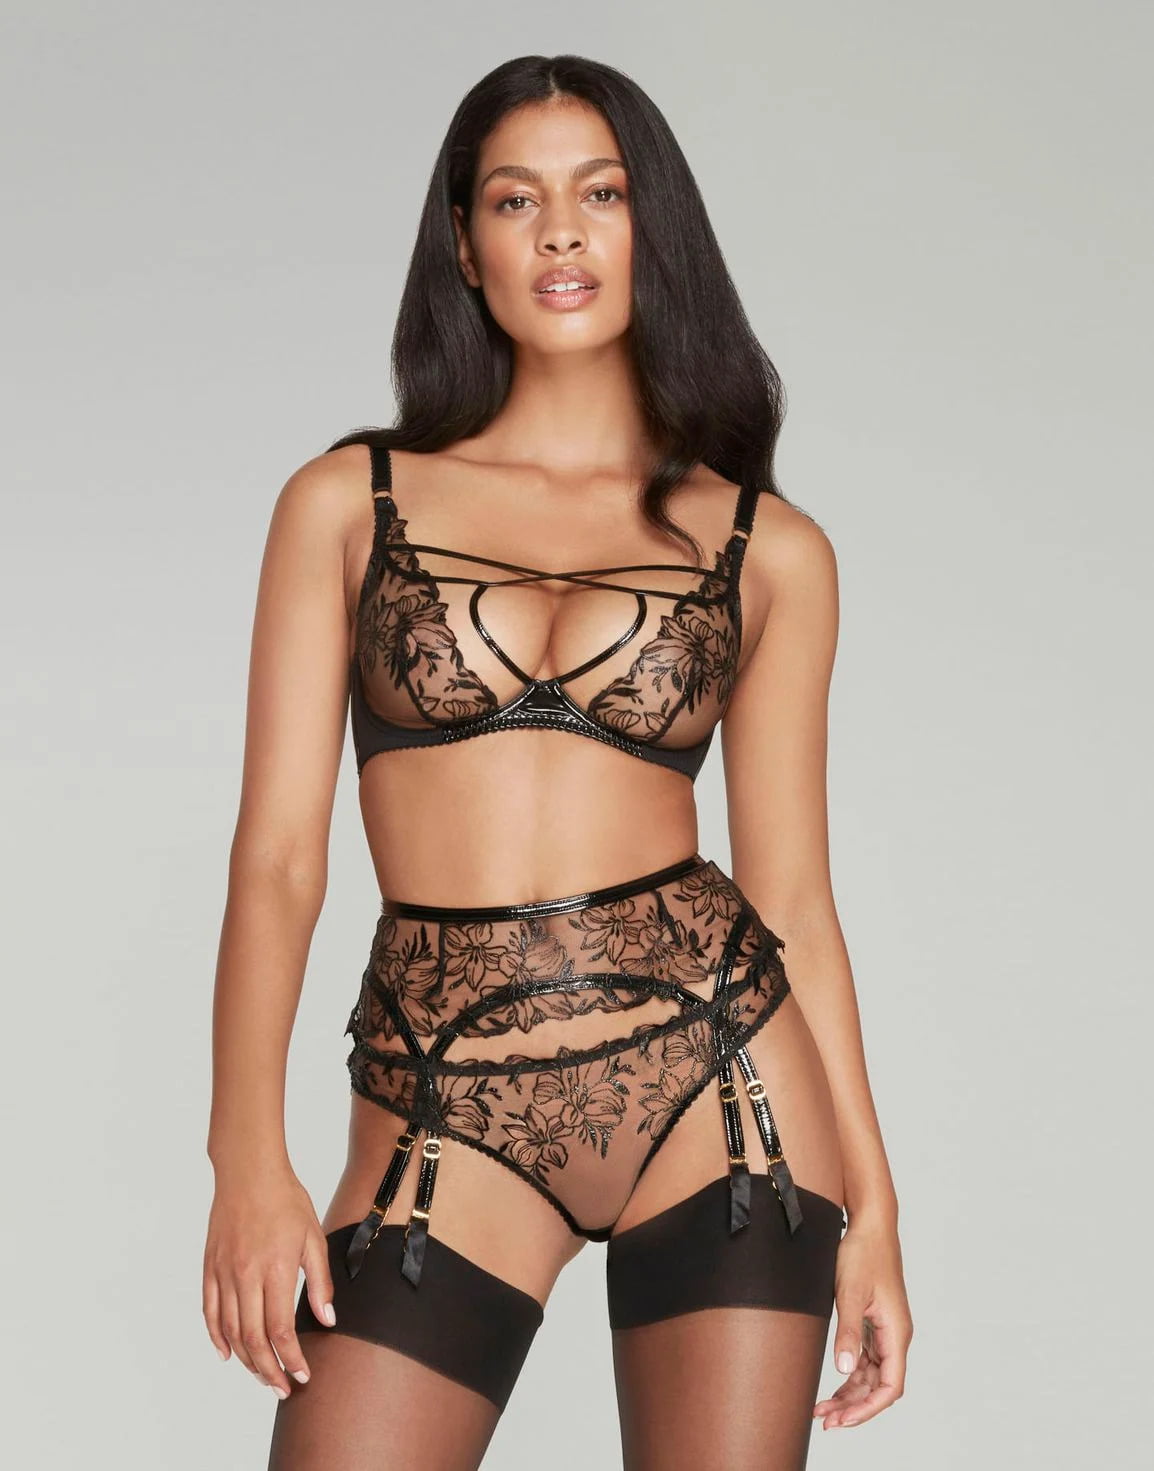 agent provocateur is an example of where to buy boudoir outfits